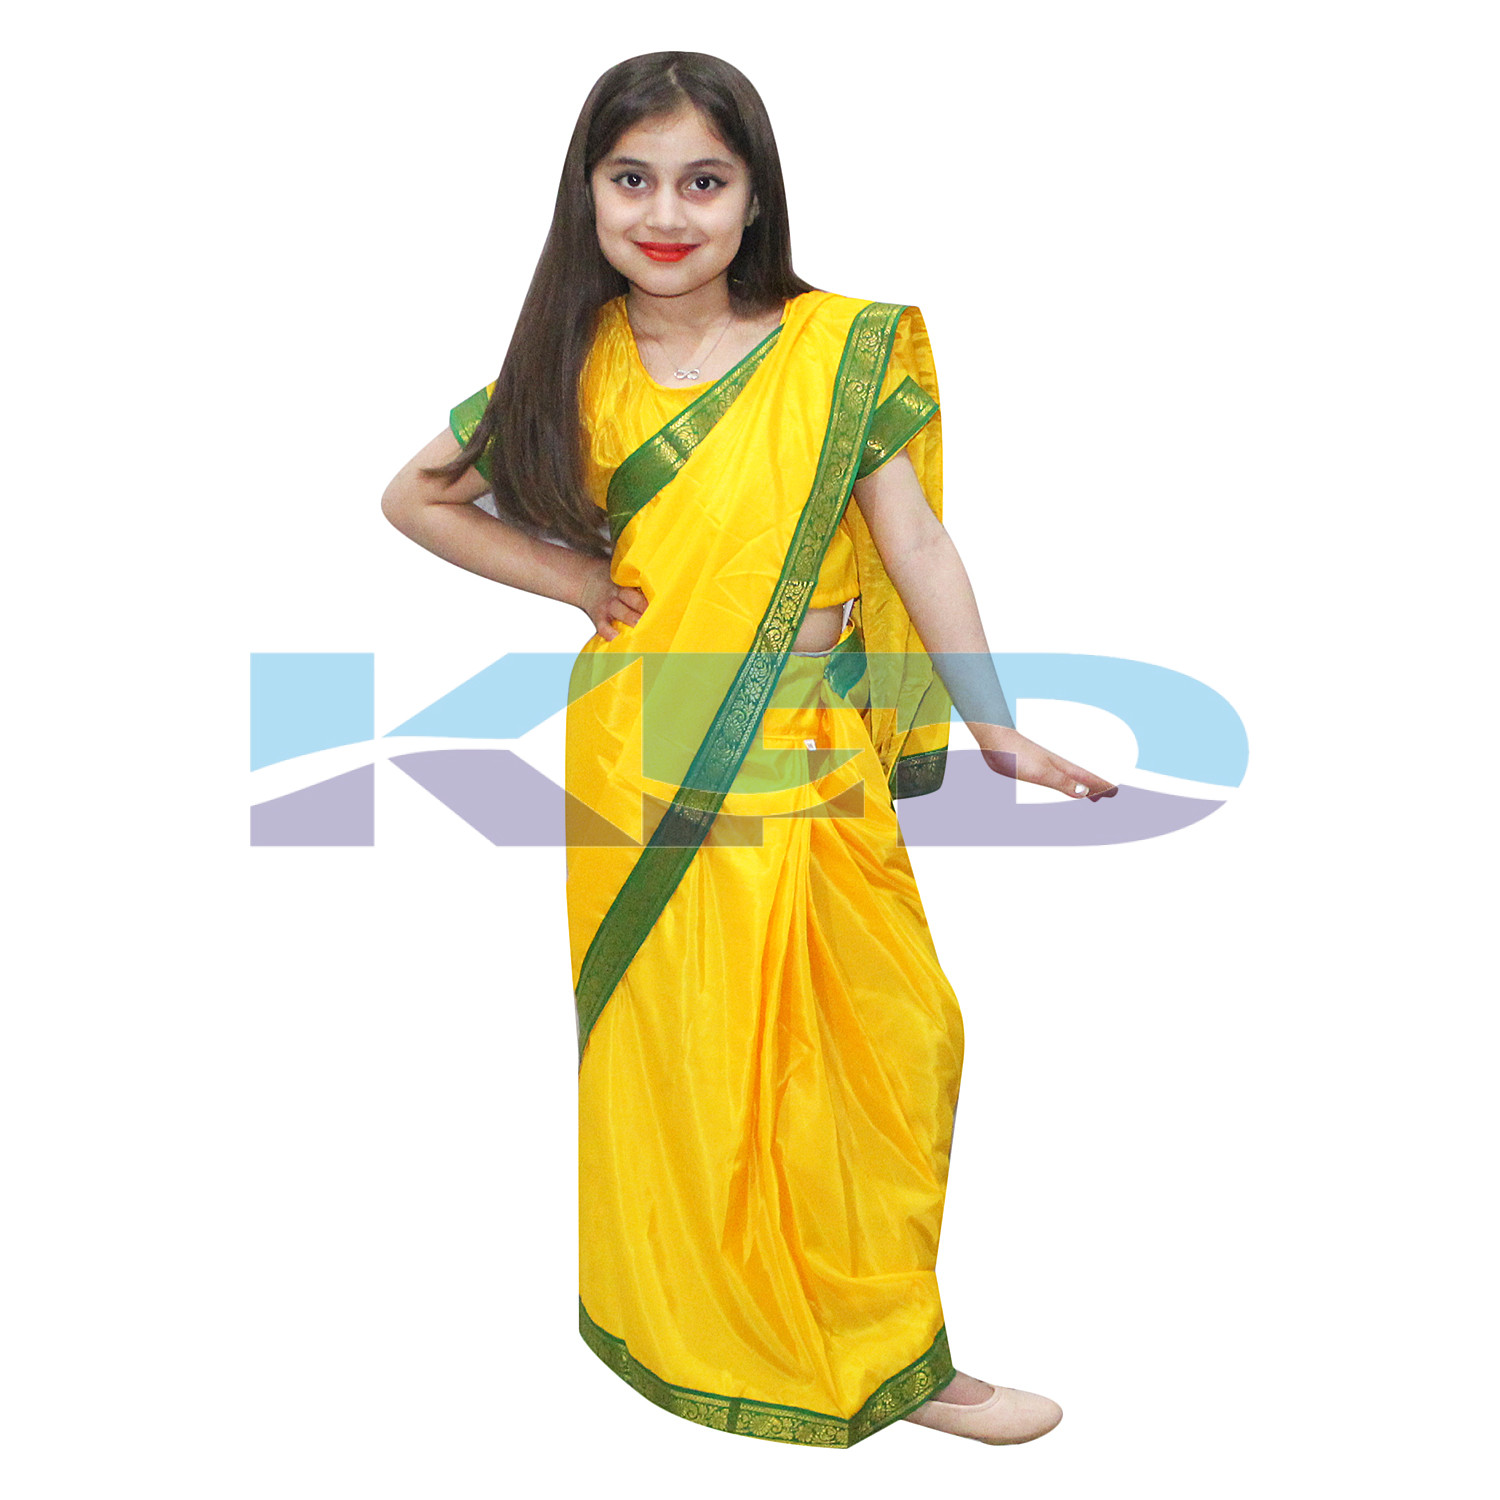  Saree In Yellow Color,Indian State Traditional Costume For School Annual function/Theme Party/Competition/Stage Shows/Birthday Party Dress